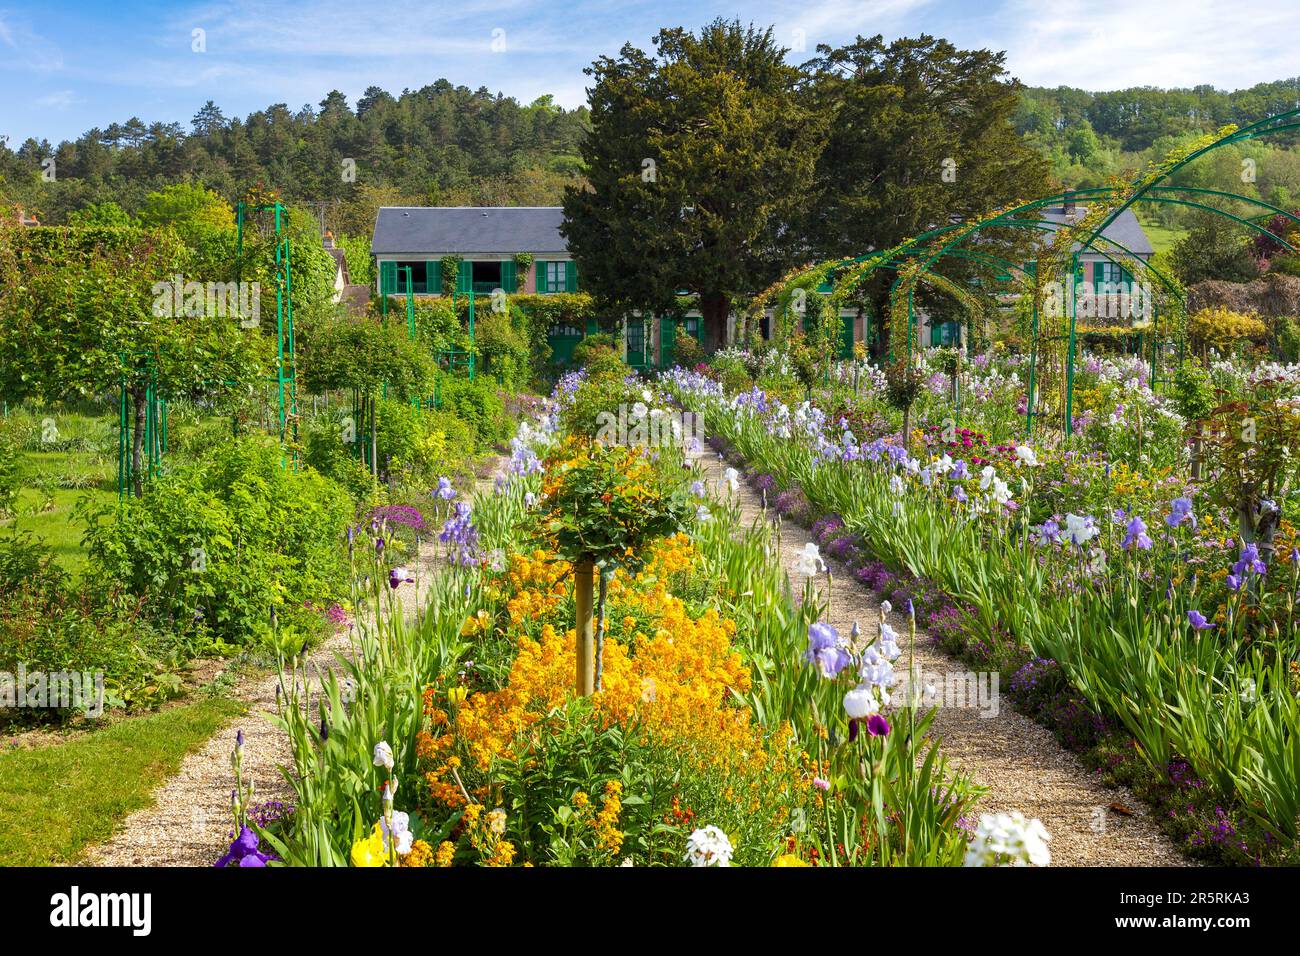 France, Eure, Giverny, Claude Monet Foundation, painter's house and flower gardens Stock Photo